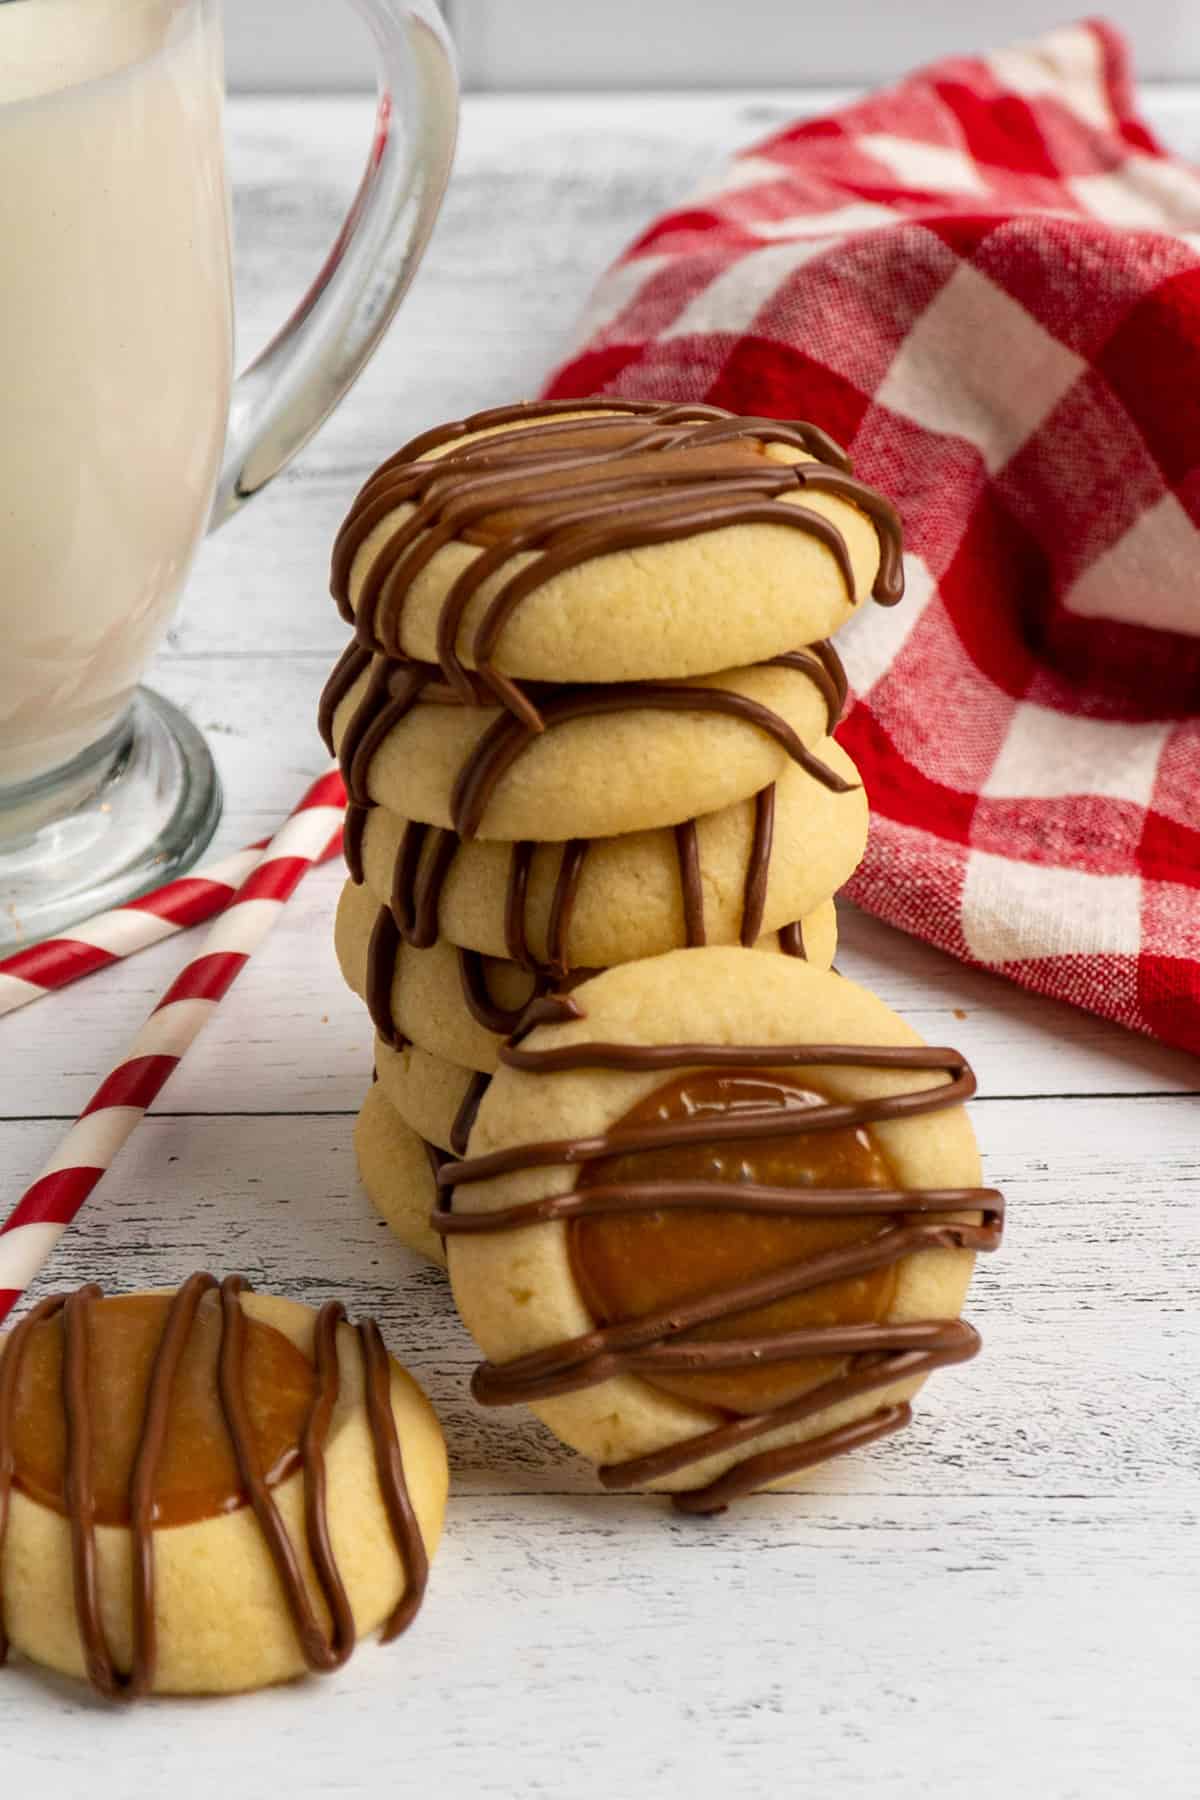 Cookies stacked up with a glass of milk in the background